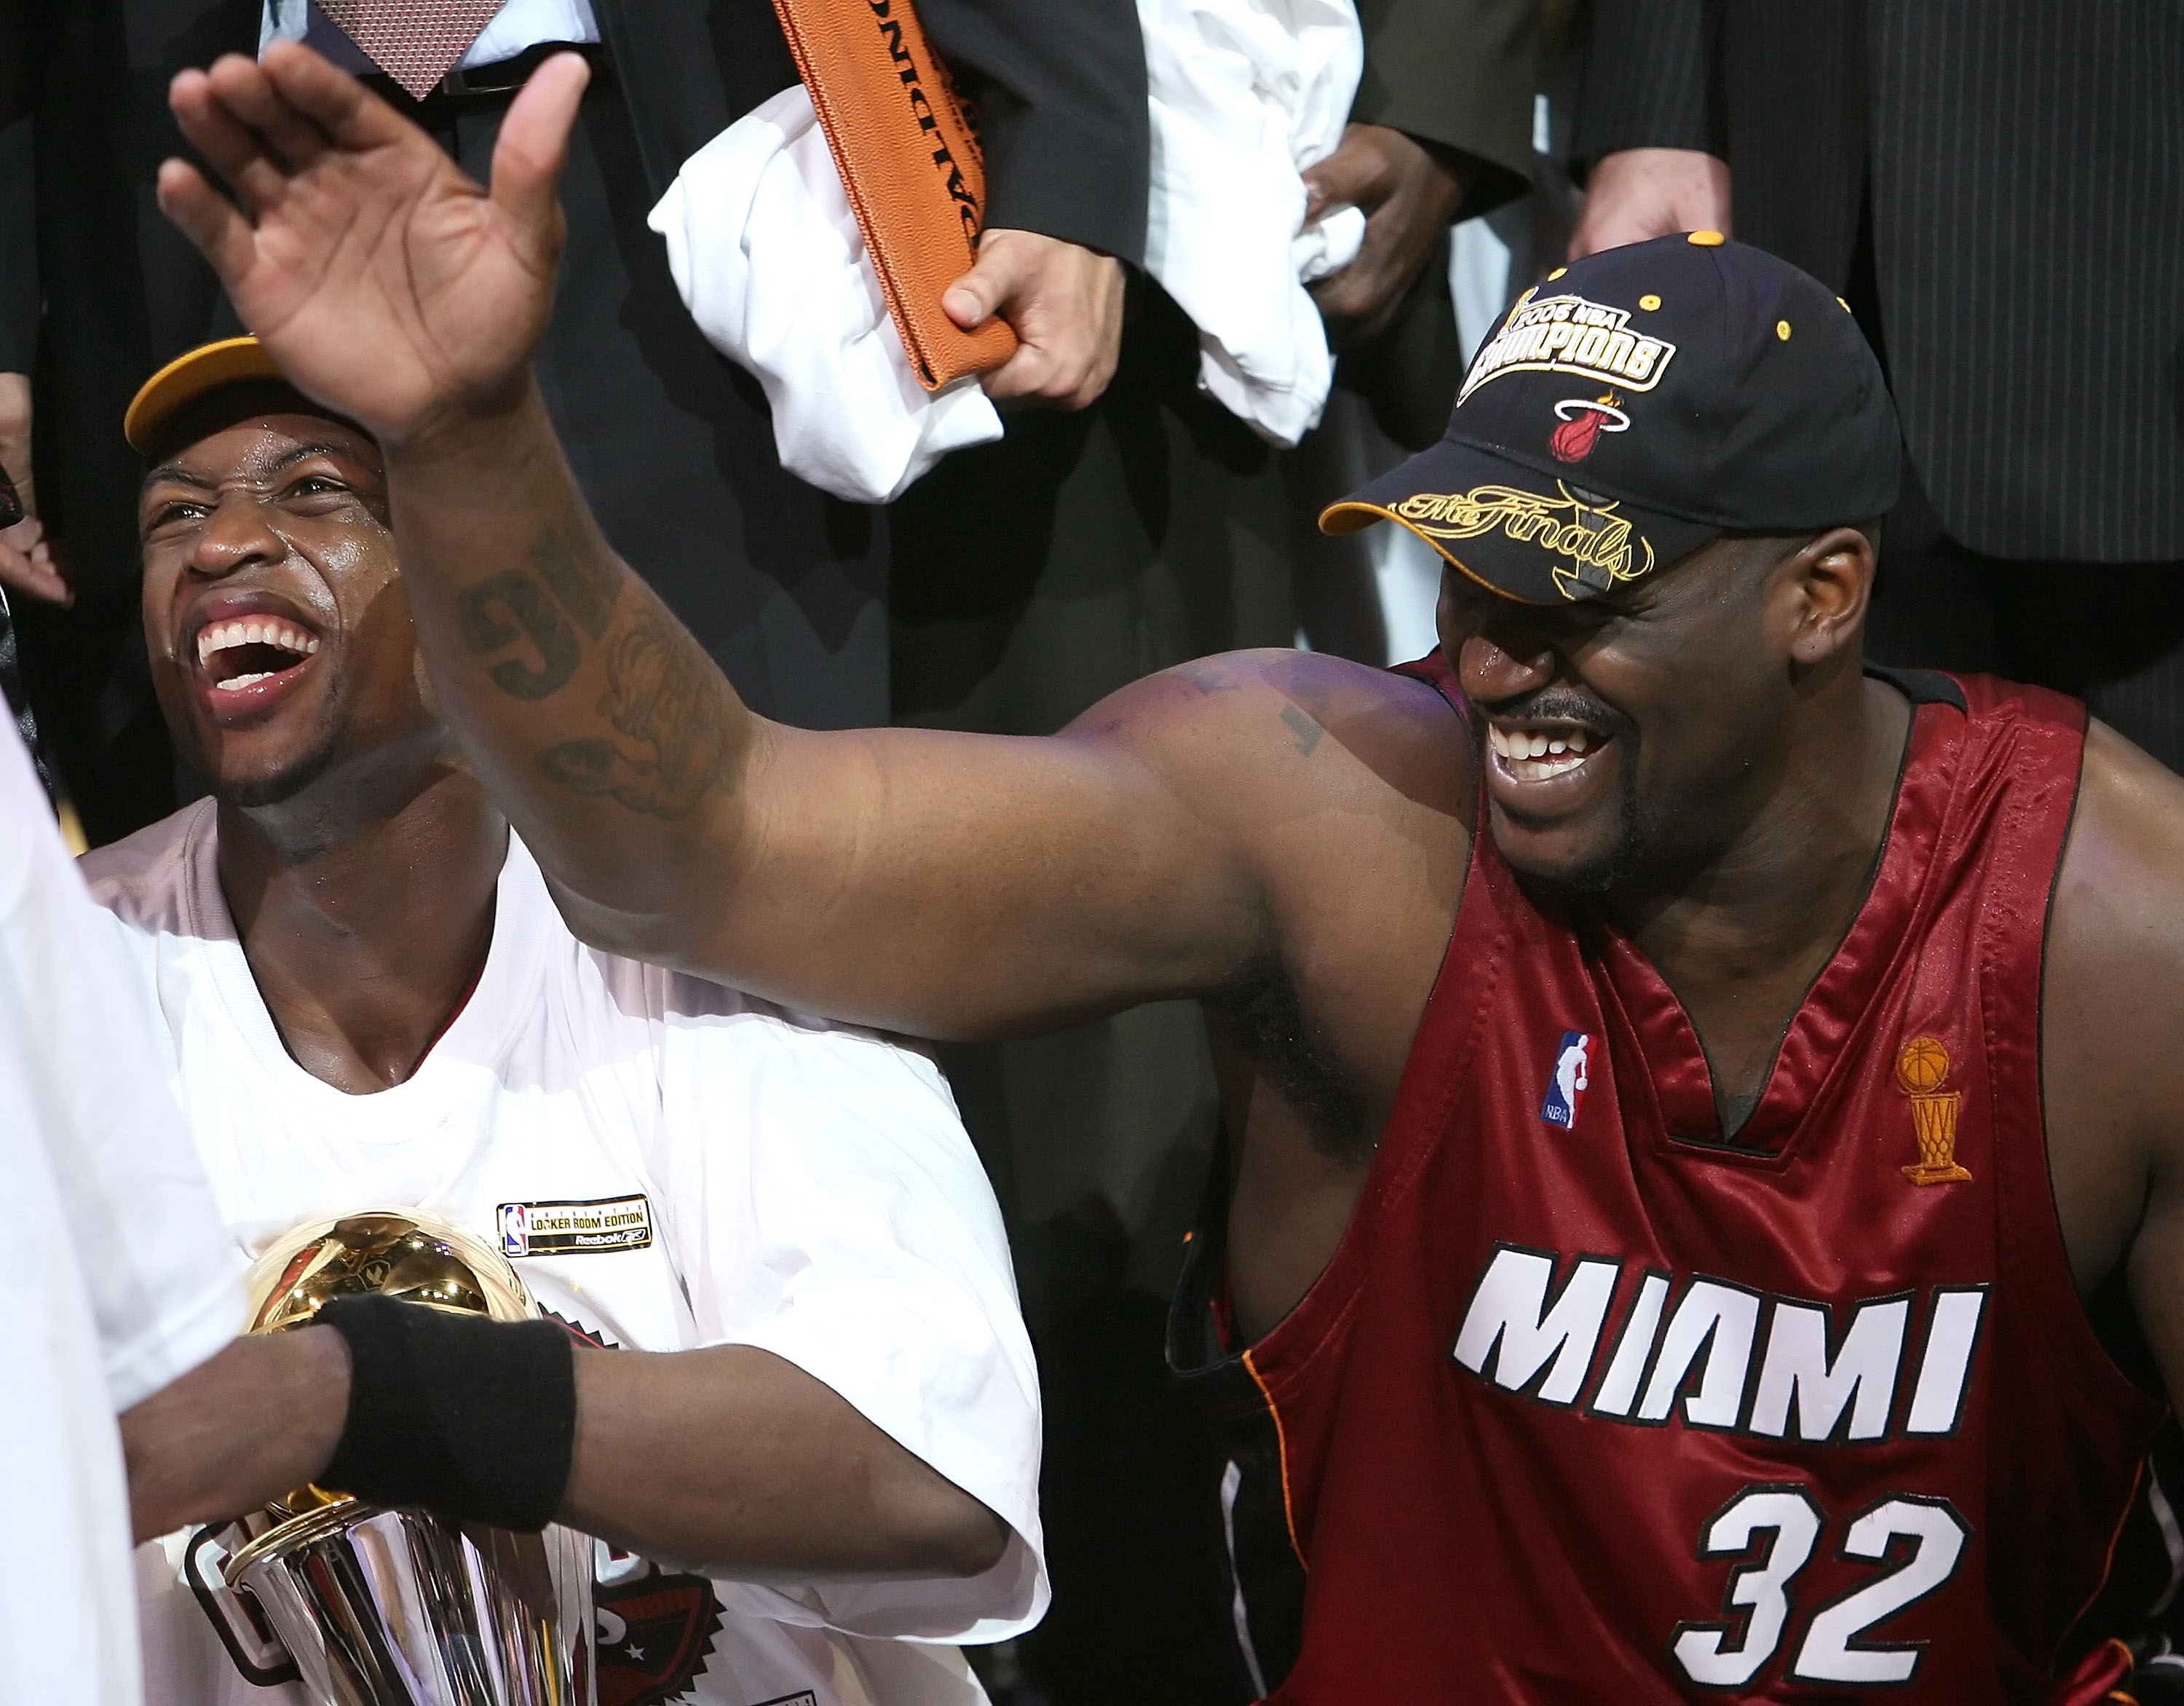 DALLAS - JUNE 20:  Series MVP Dwyane Wade #3 and Shaquille O'Neal #32 of the Miami Heat celebrate together after the Heat defeated the Dallas Mavericks in game six of the 2006 NBA Finals on June 20, 2006 at American Airlines Center in Dallas, Texas.  The